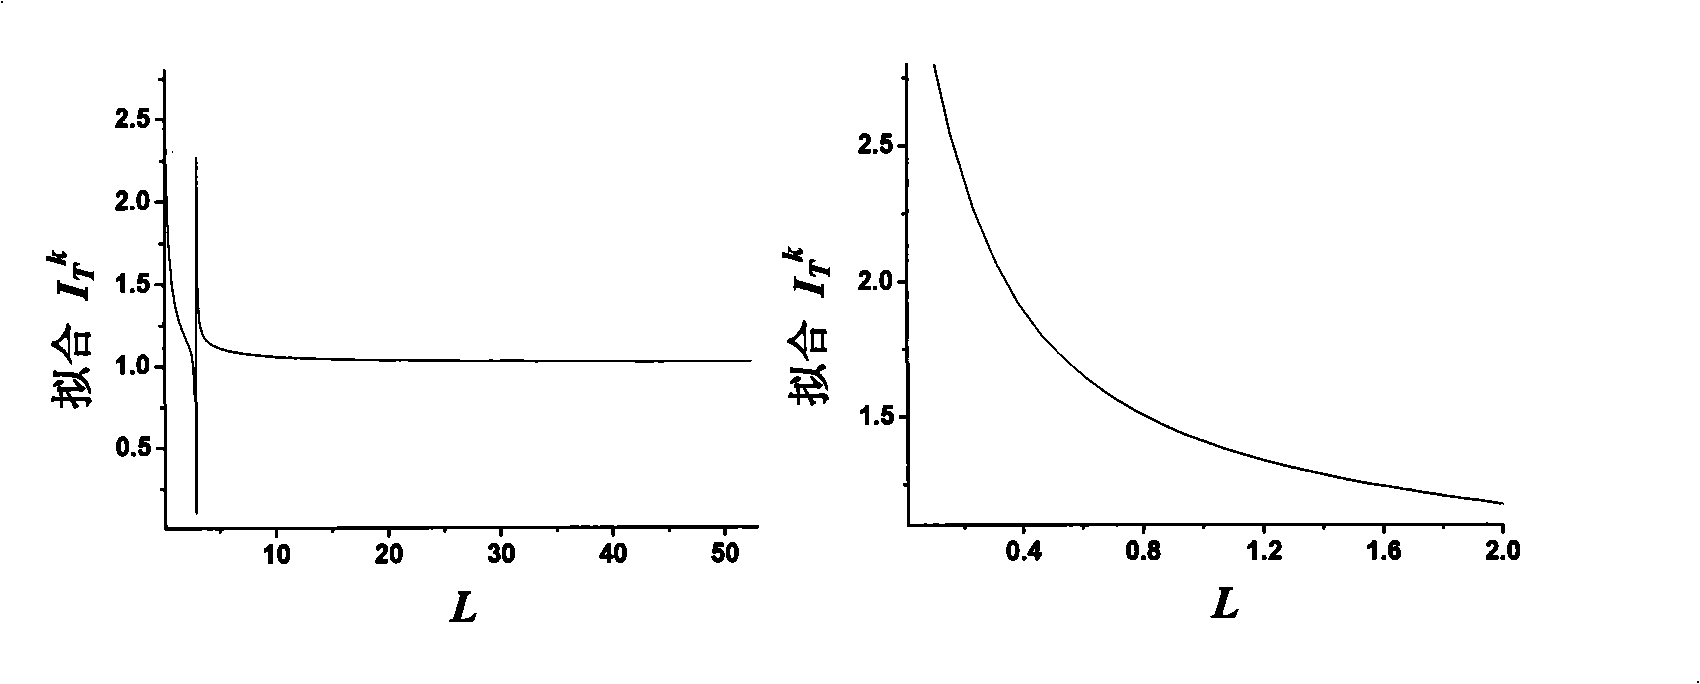 Current fitting curve sudden change elimination method for liquid/liquid interface scanning electro-chemical microscope